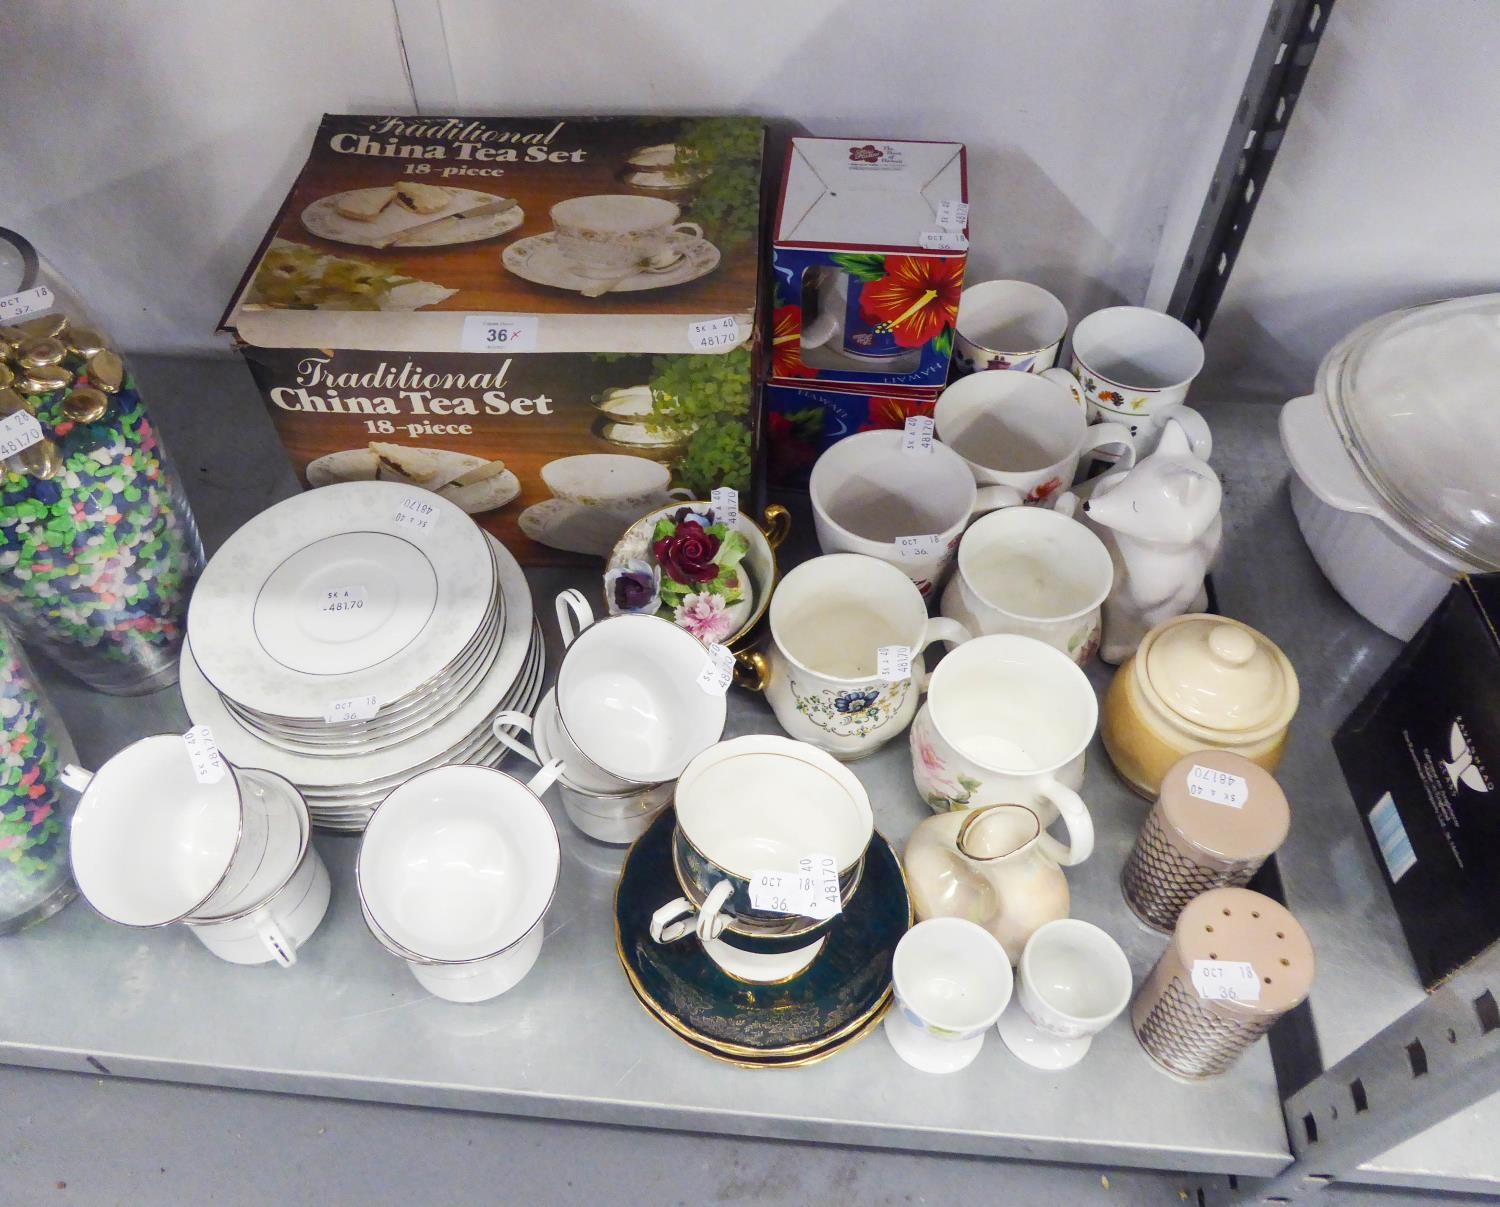 AN EIGHTEEN PIECE TEA SET (BOXED), A CHINESE TEA SET FOR SIX PERSONS (18 PERSON) AND A SELECTION